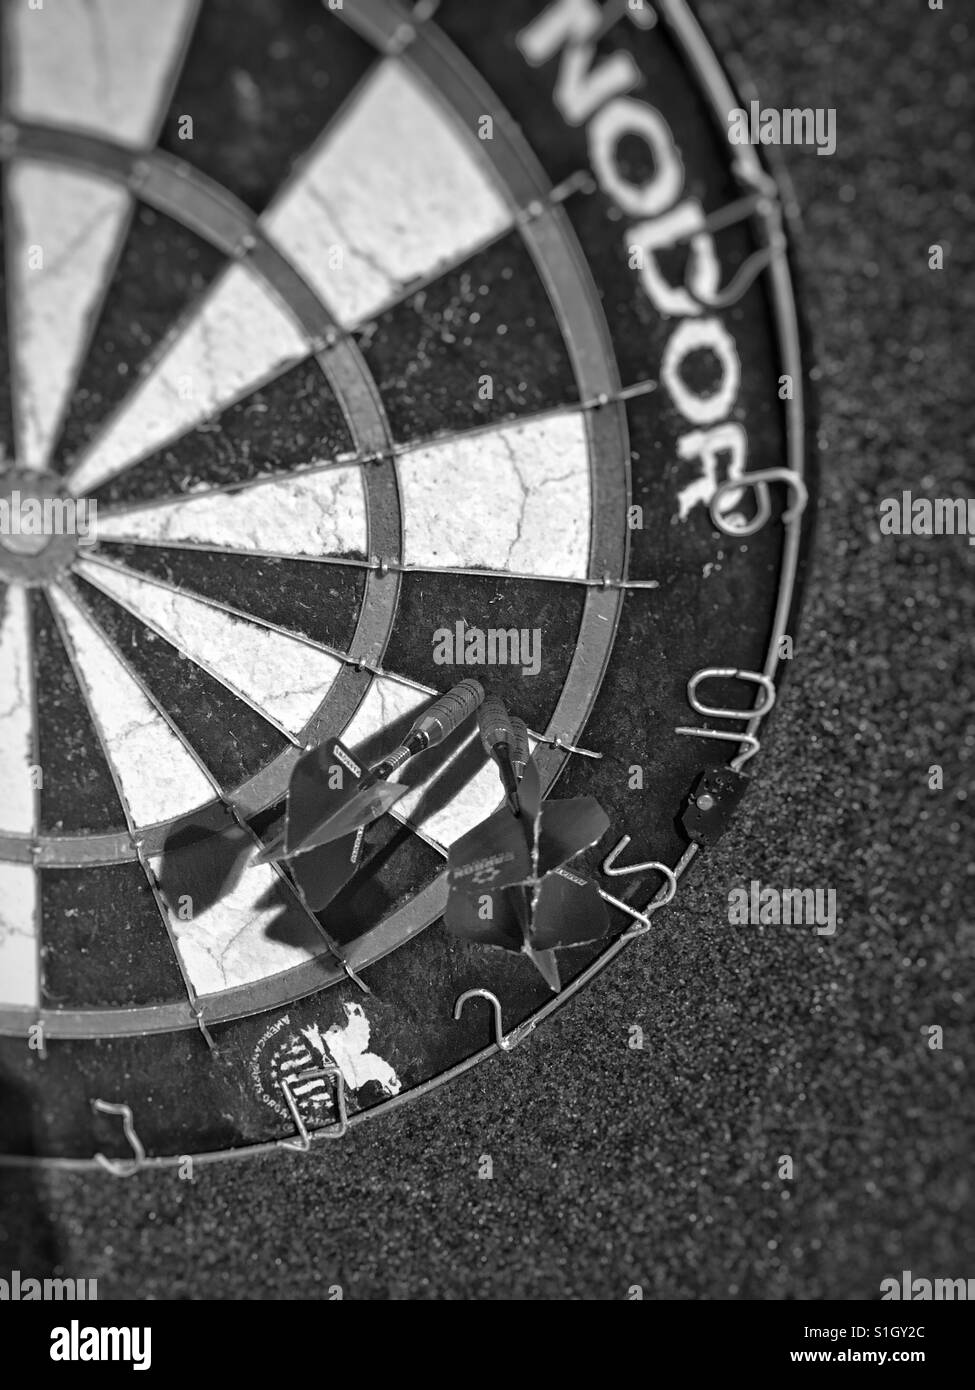 Well placed darts in a nice grouping. Stock Photo